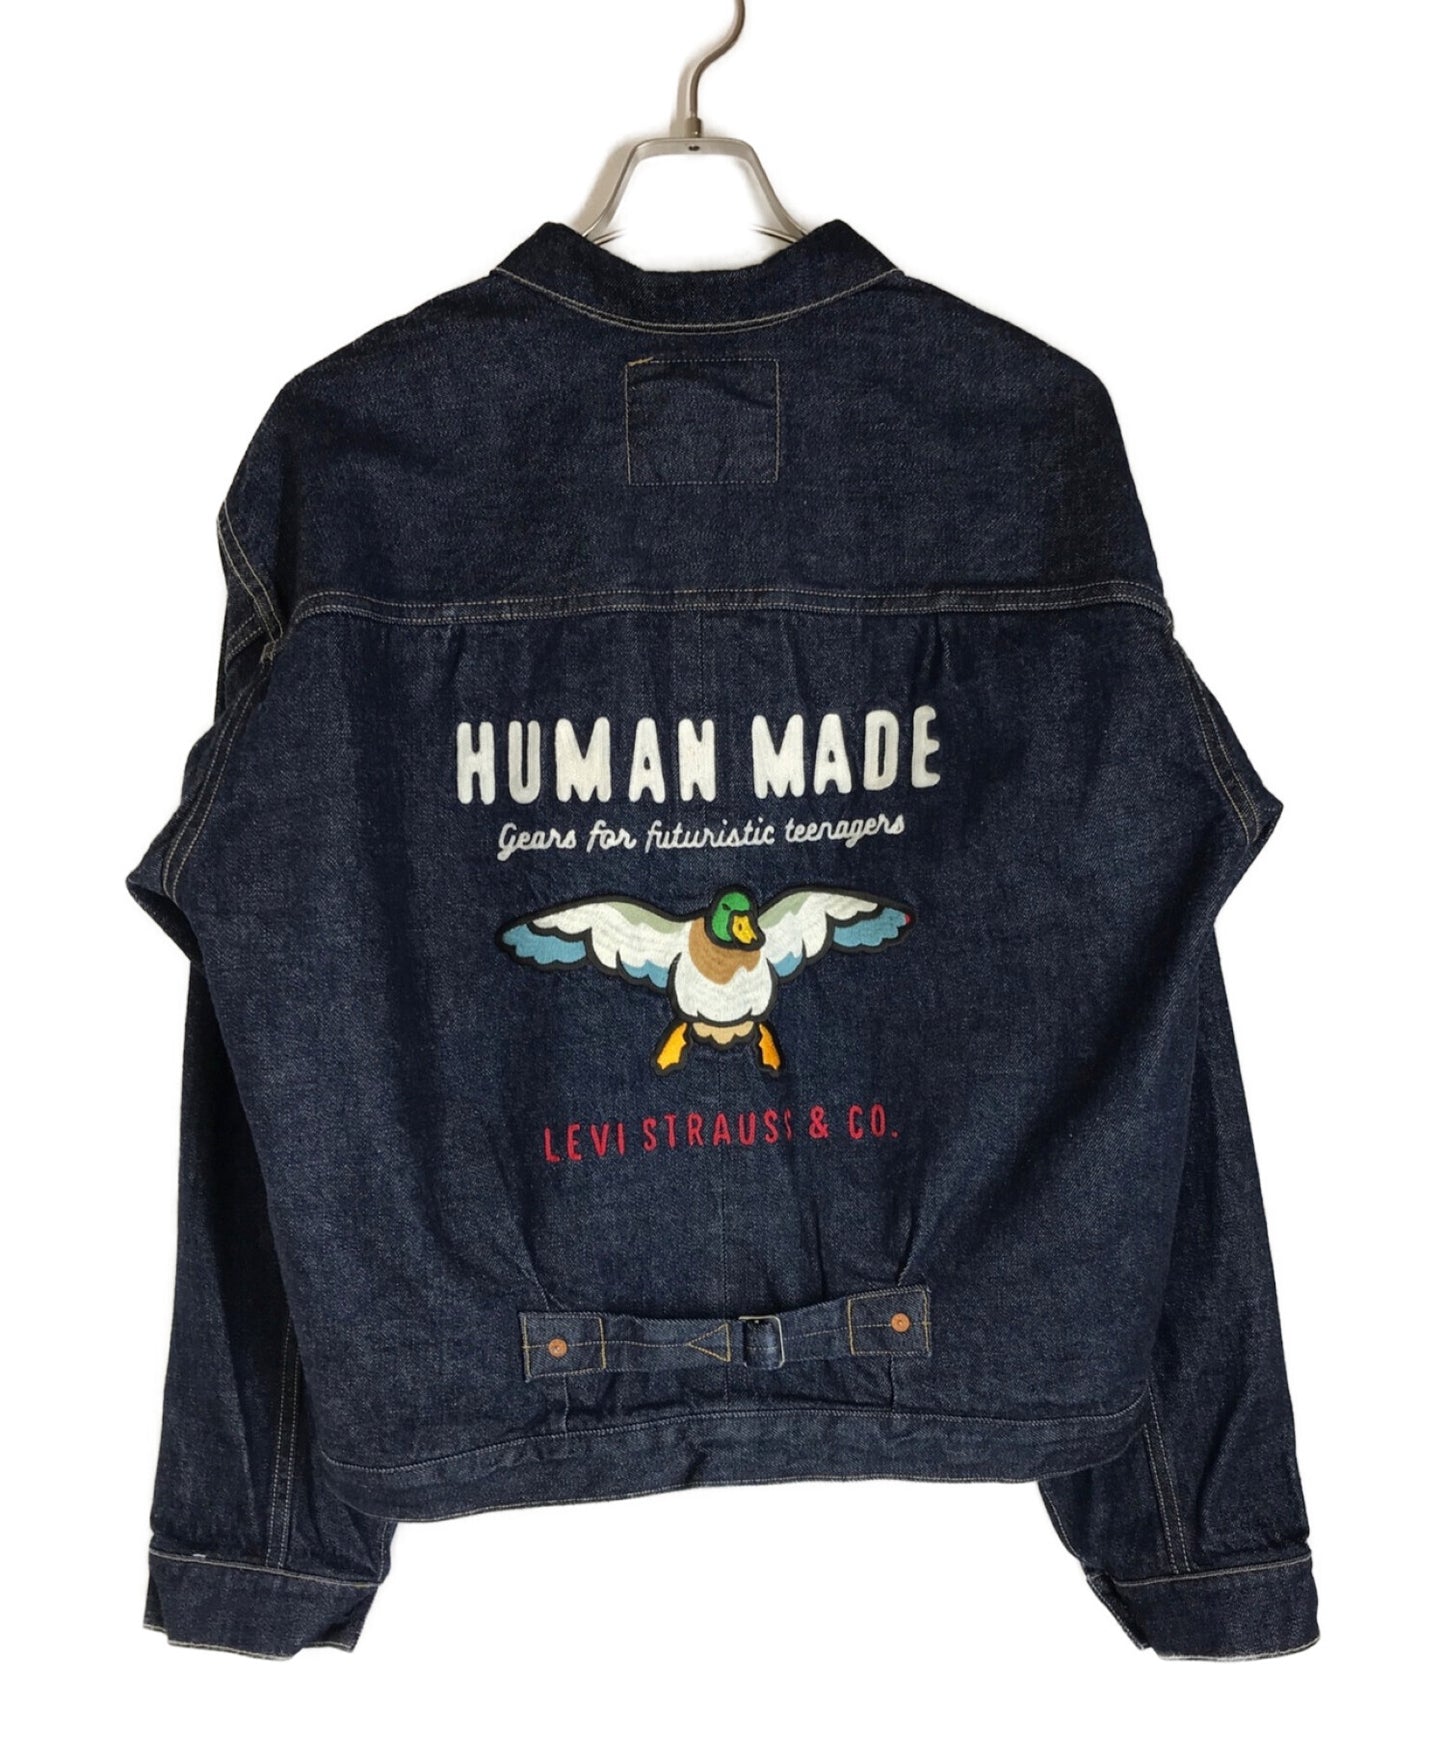 LEVI'S×HUMAN MADE 22SS 506 TRUCKER JACKET A3555-0000 | Archive Factory